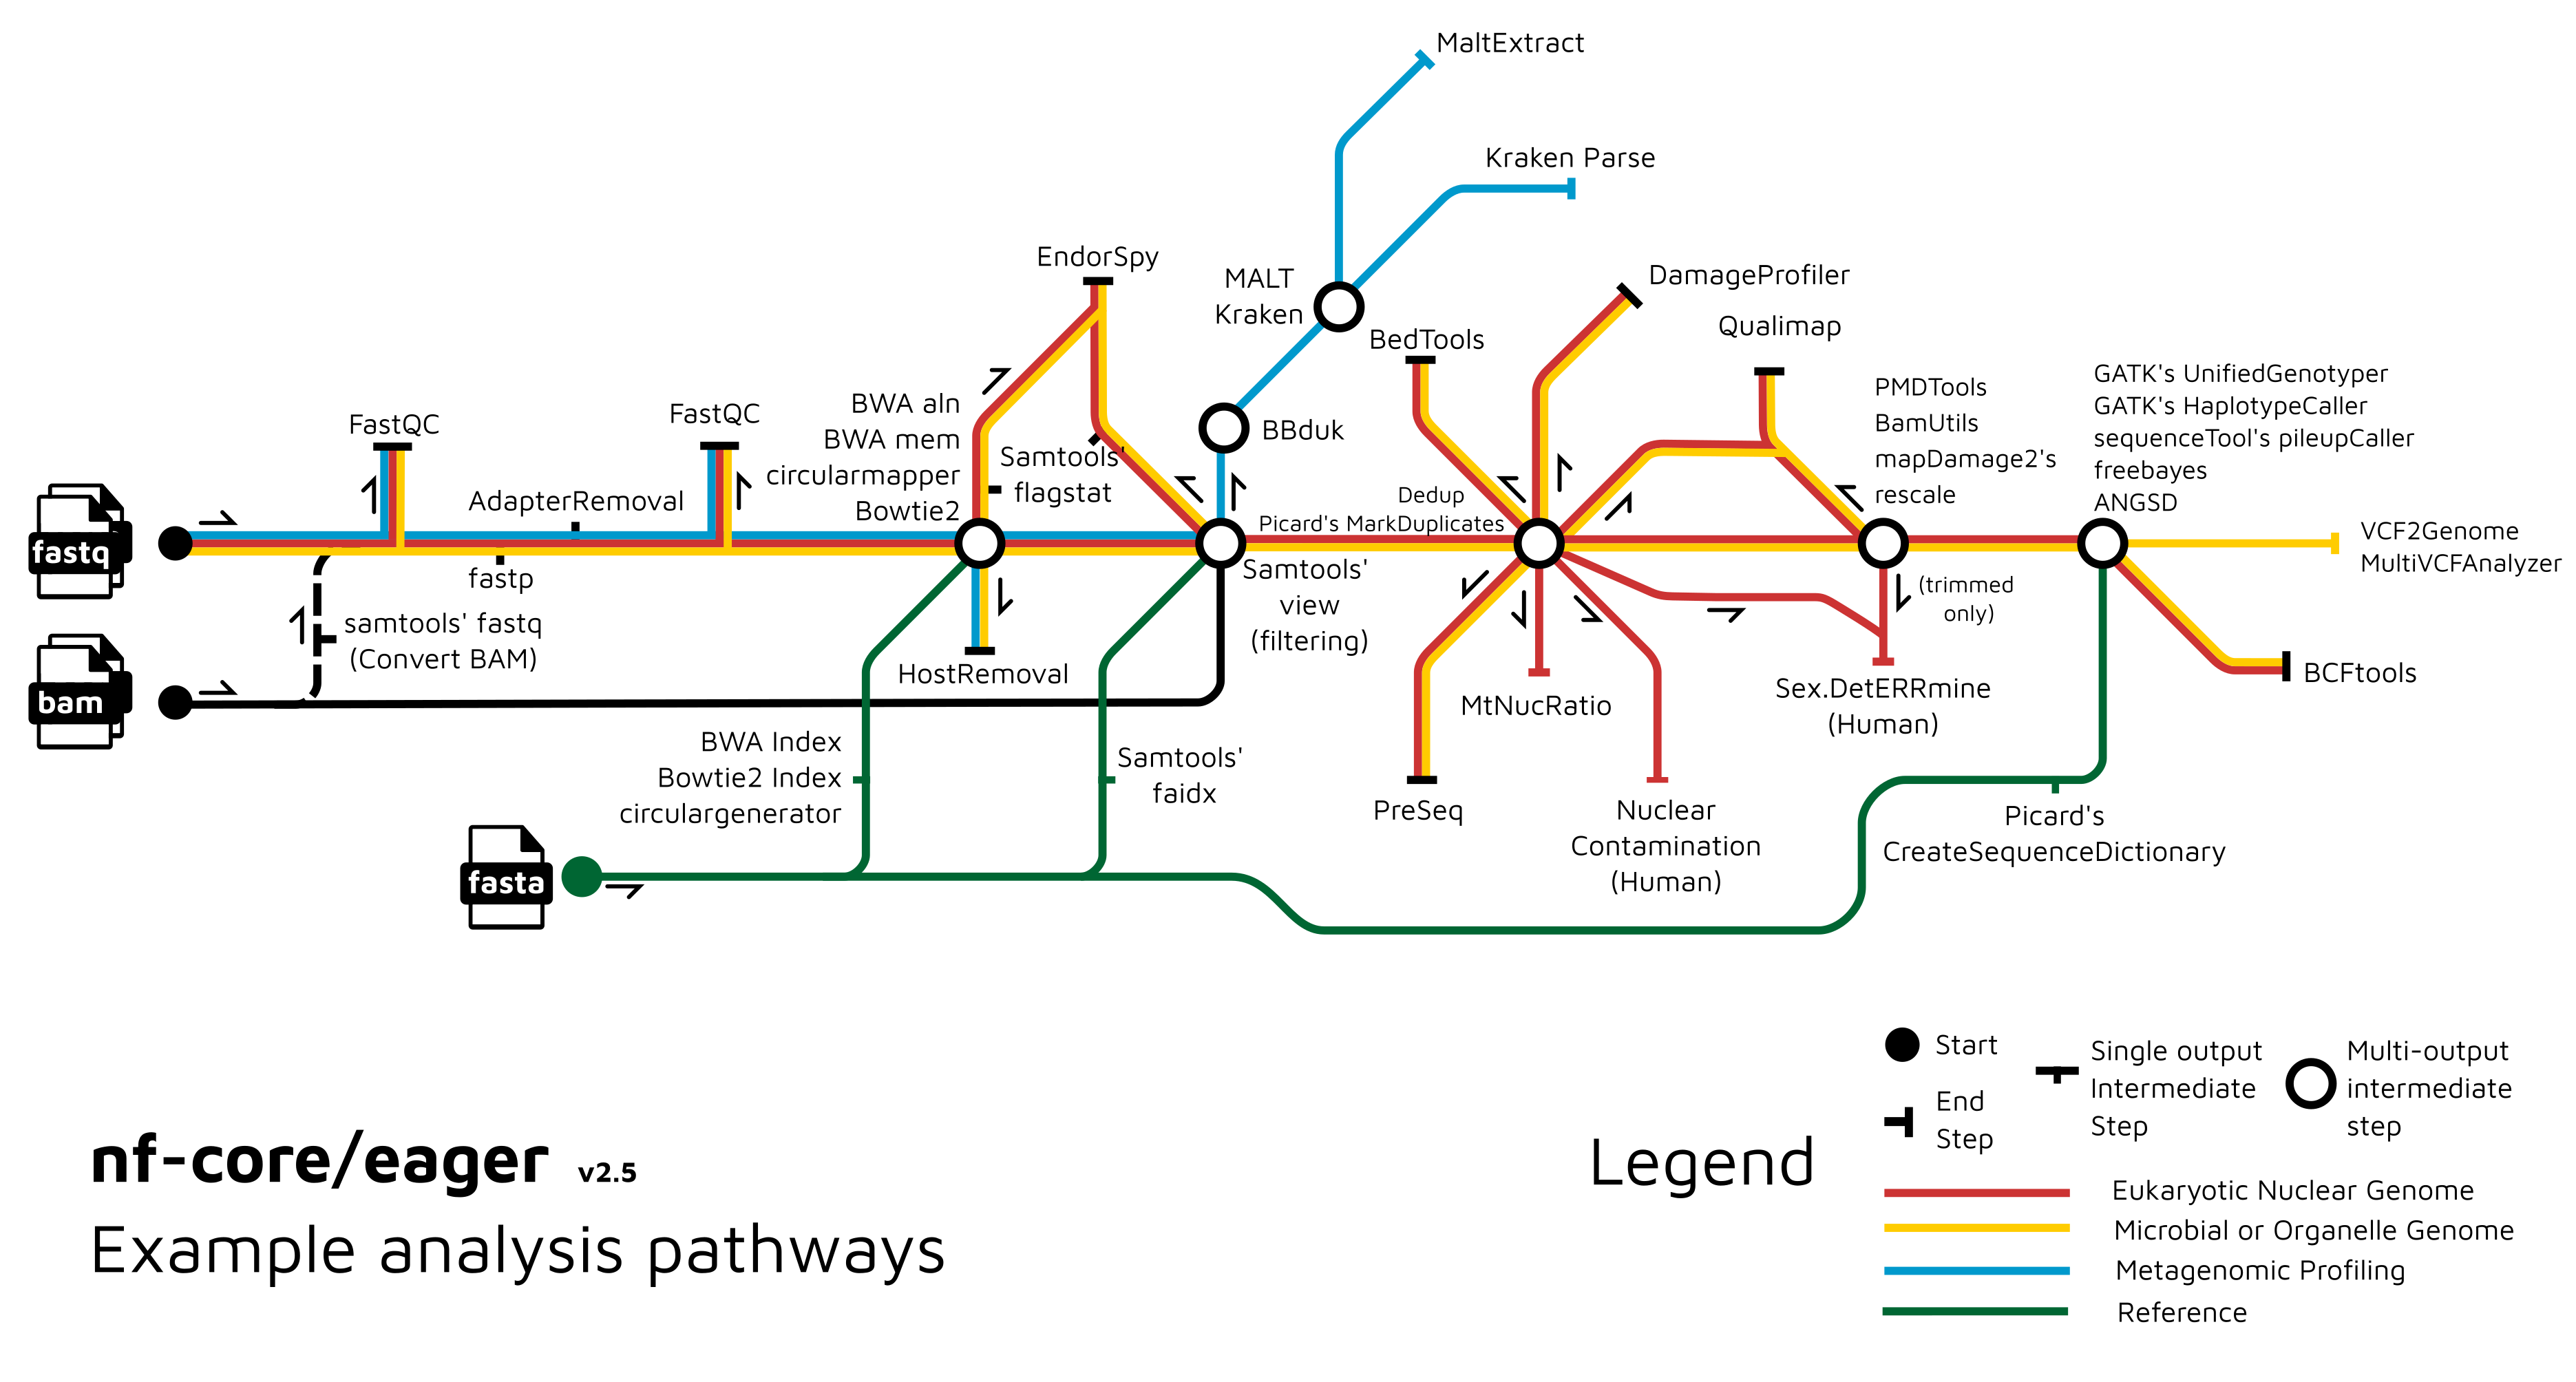 nf-core/eager pipeline diagram in the style of a tube-map